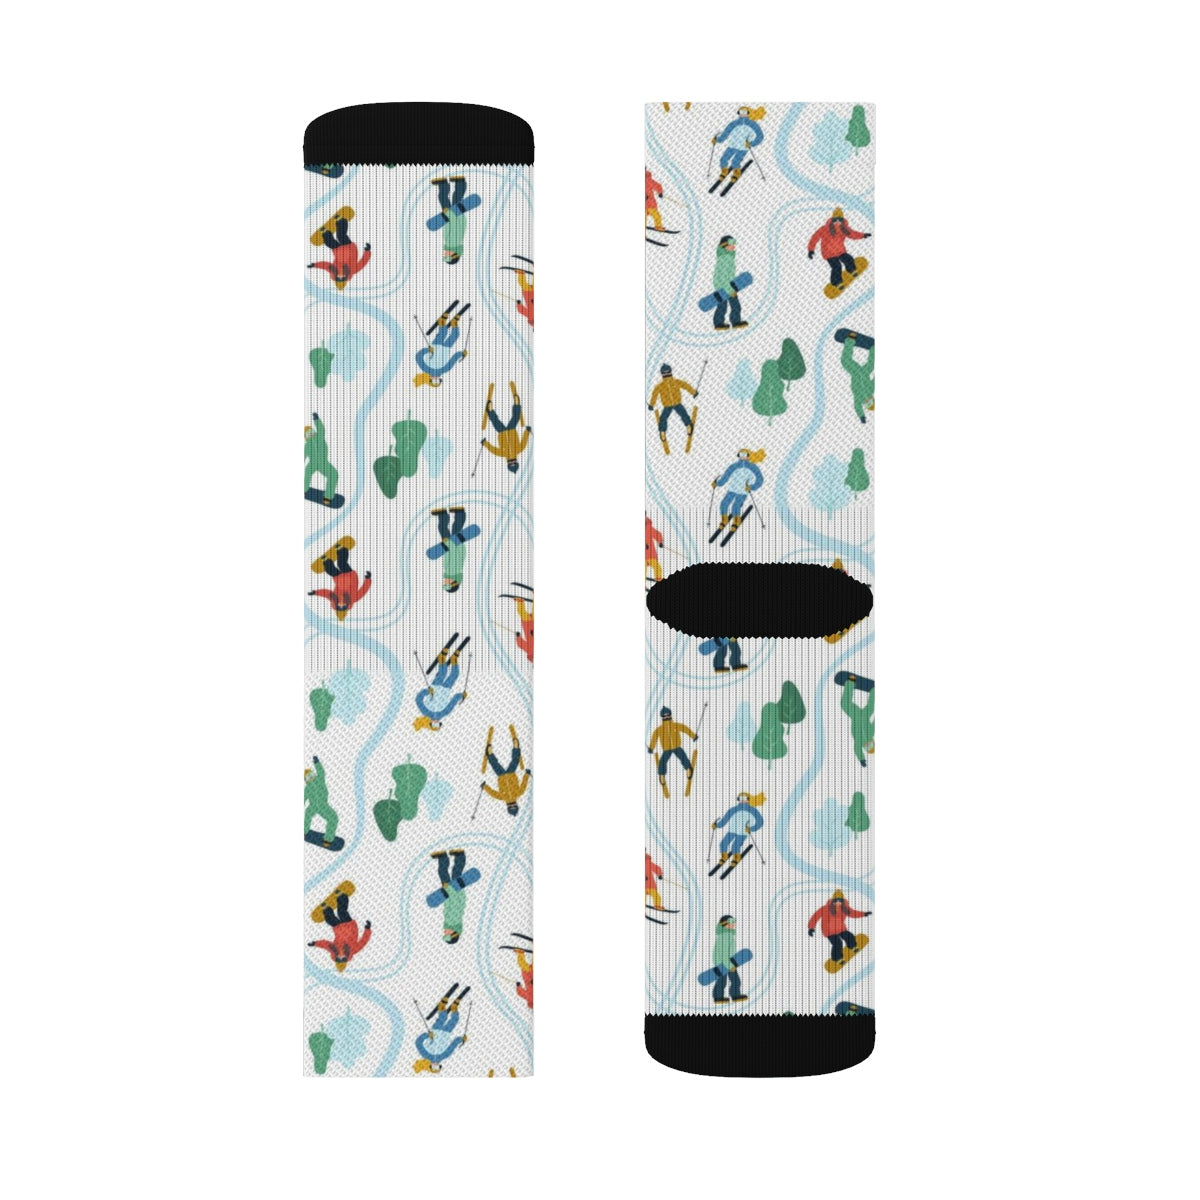 Ski Snowboarding Print Socks, Skiing Mountain 3D Sublimation Socks Women Men Funny Fun Novelty Cool Funky Crazy Casual Cute Unique Gift Starcove Fashion